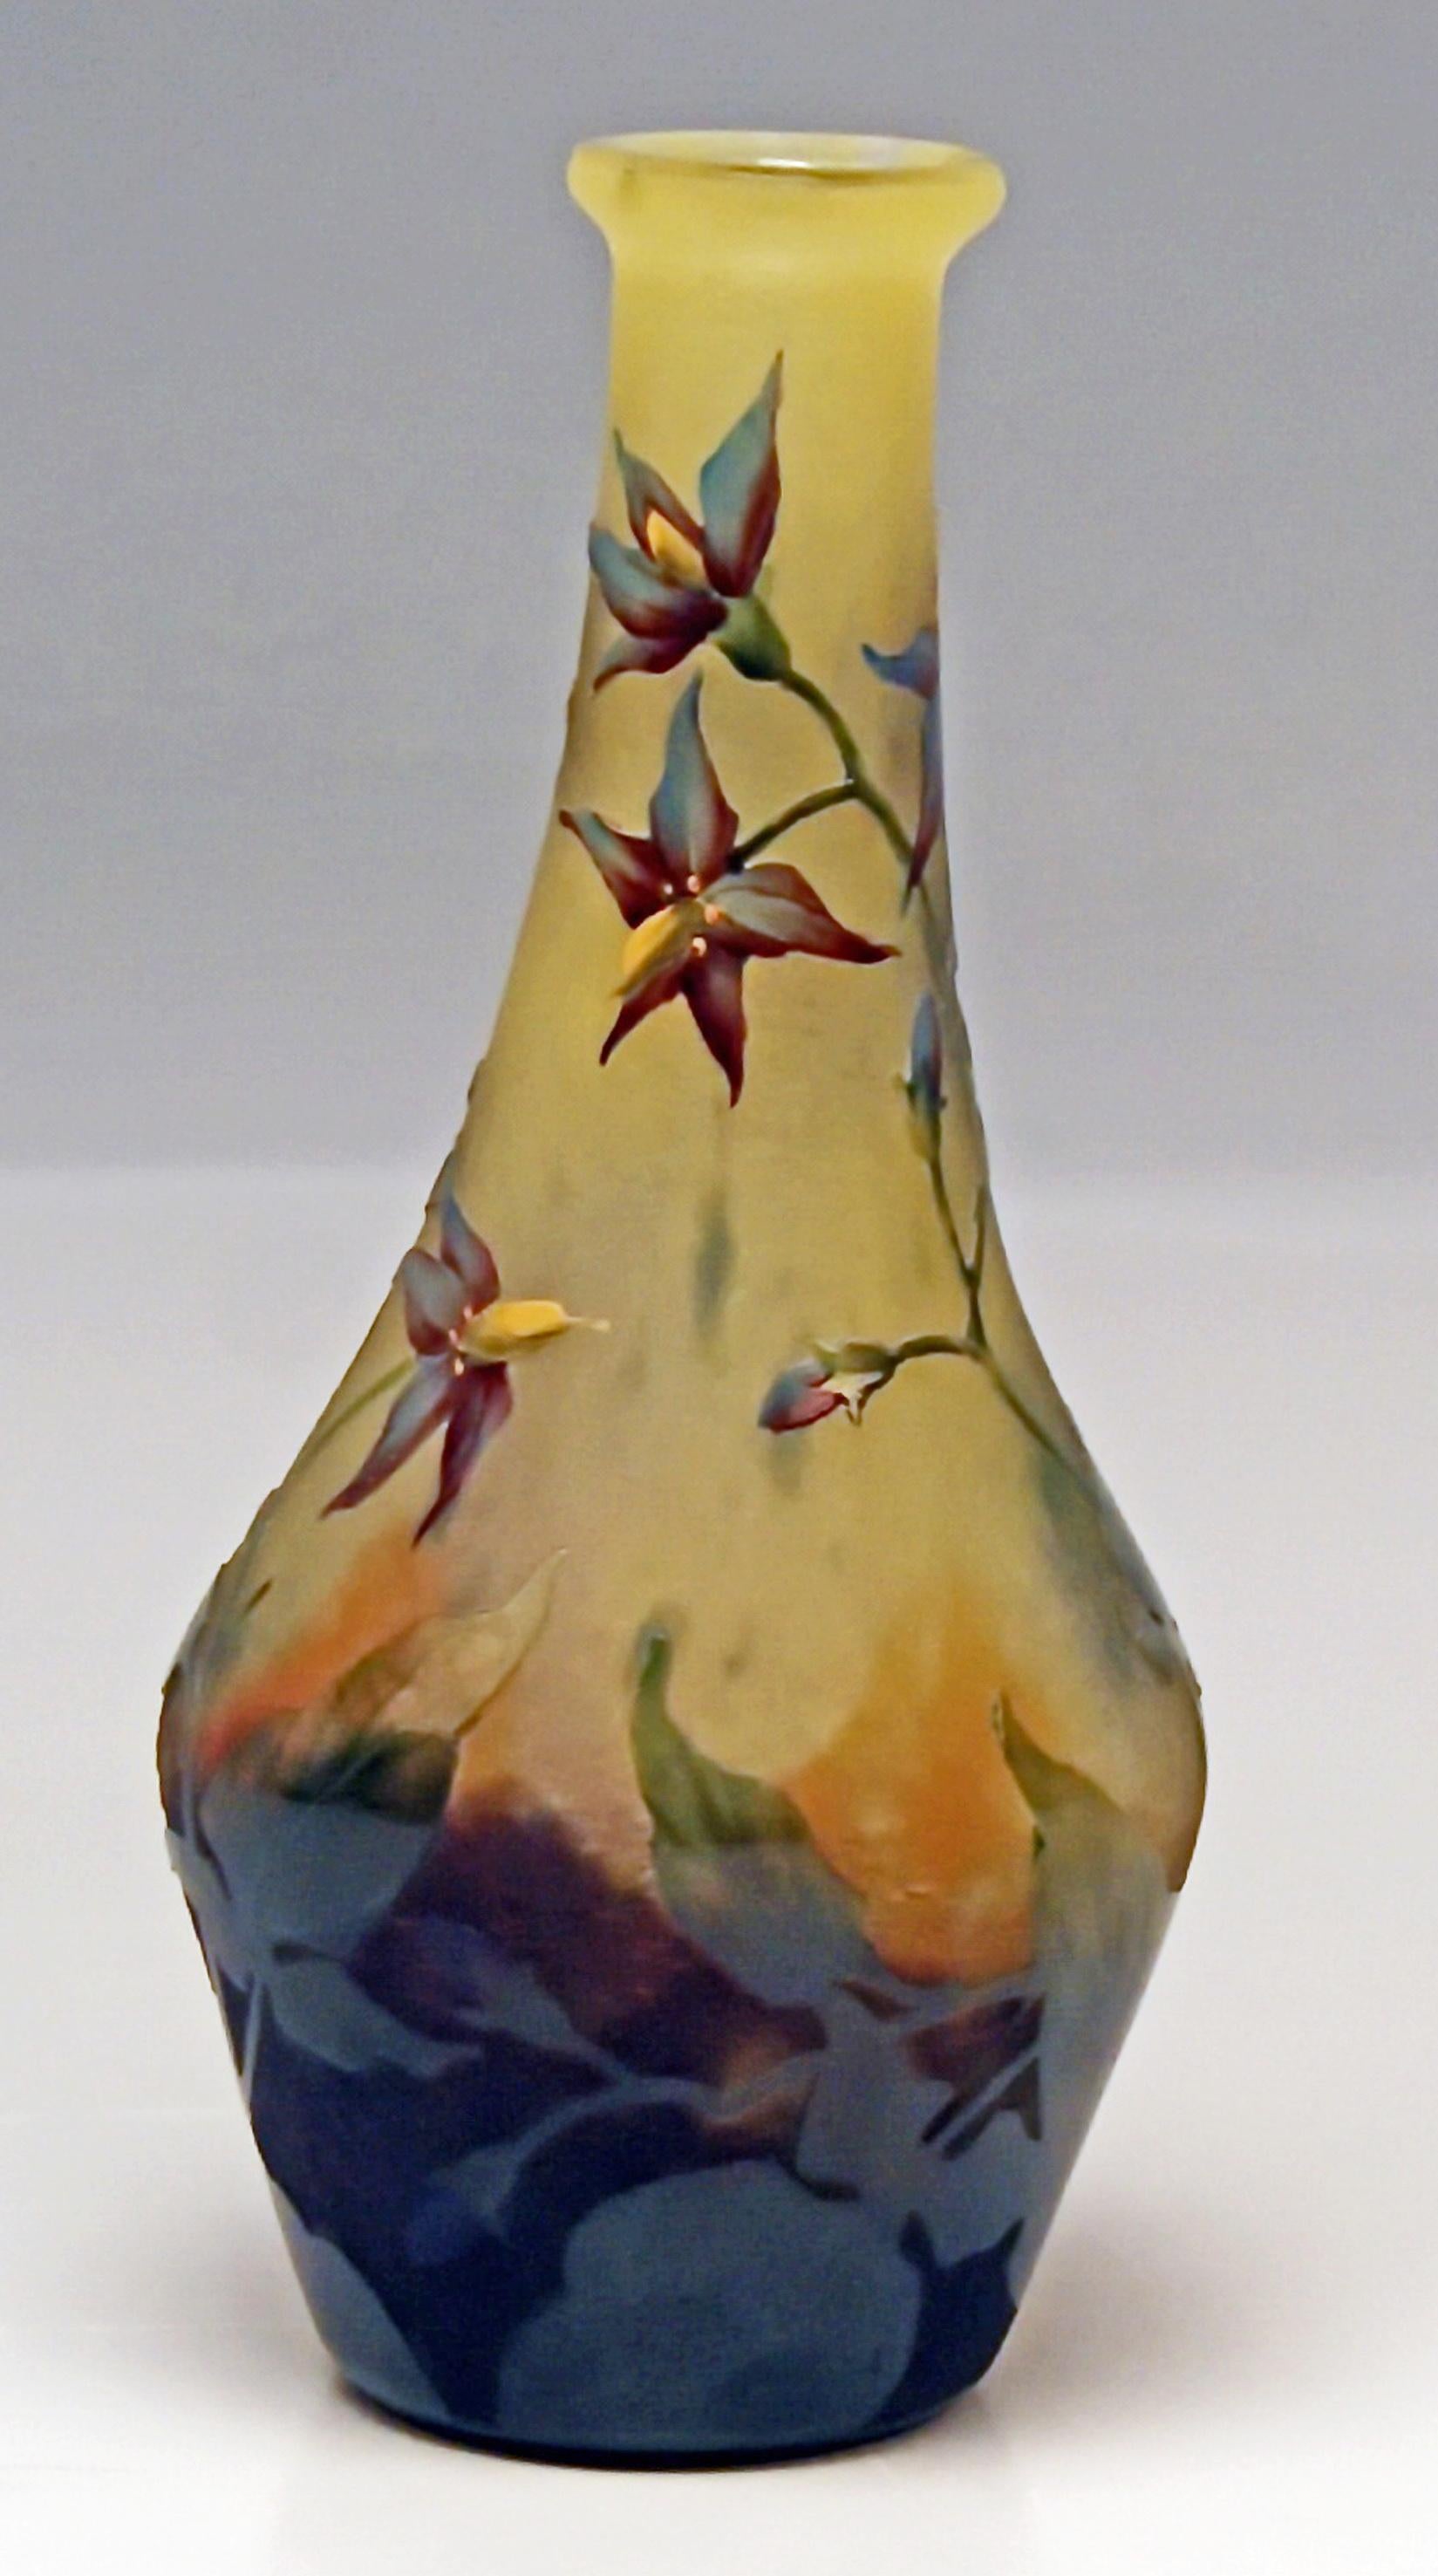 Daum Nancy Cameo finest art glass shoulder stalky vase of Art Nouveau period.
Excellently decorated with lovely flowers: so-said Bittersweet nightshades / blue bindweeds

Manufactory: Daum Frères / made in France / Nancy, Lorraine, circa 1910.